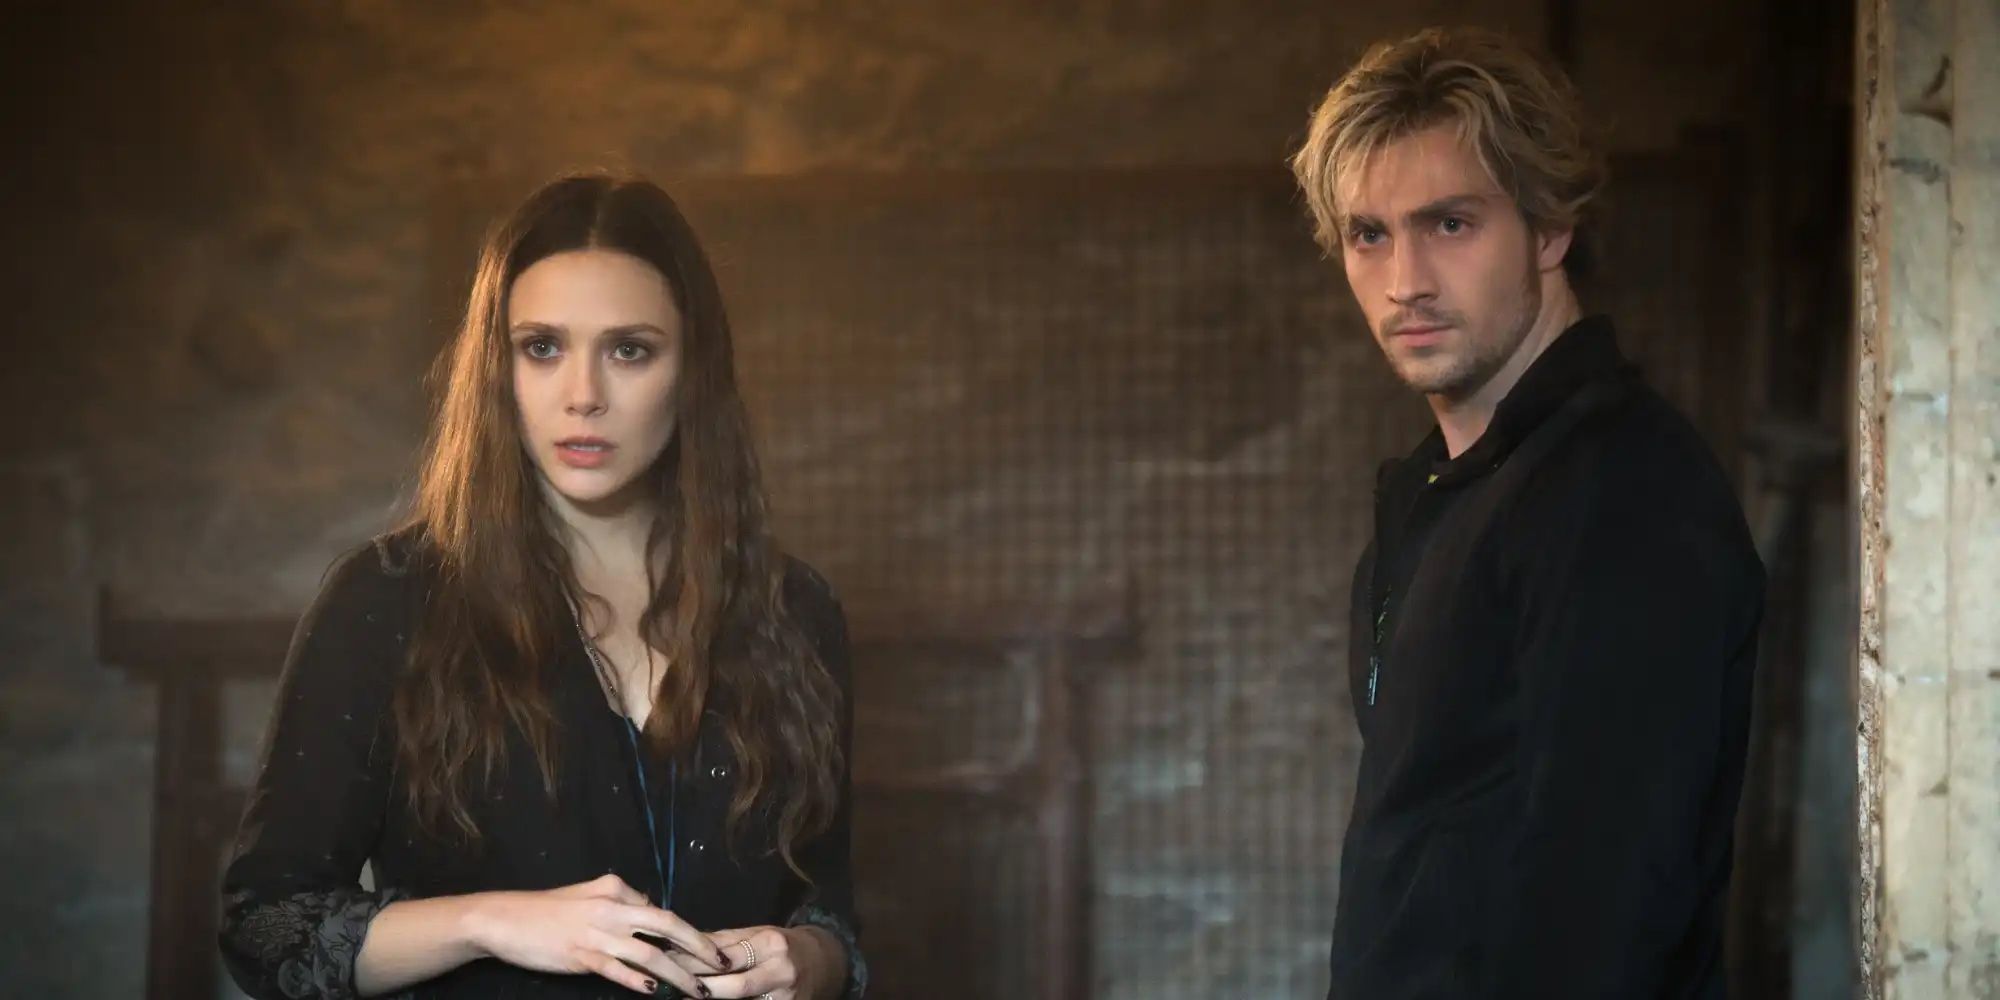 Wanda and Pietro Maximoff looking intently in the same direction in Avengers: Age of Ultron